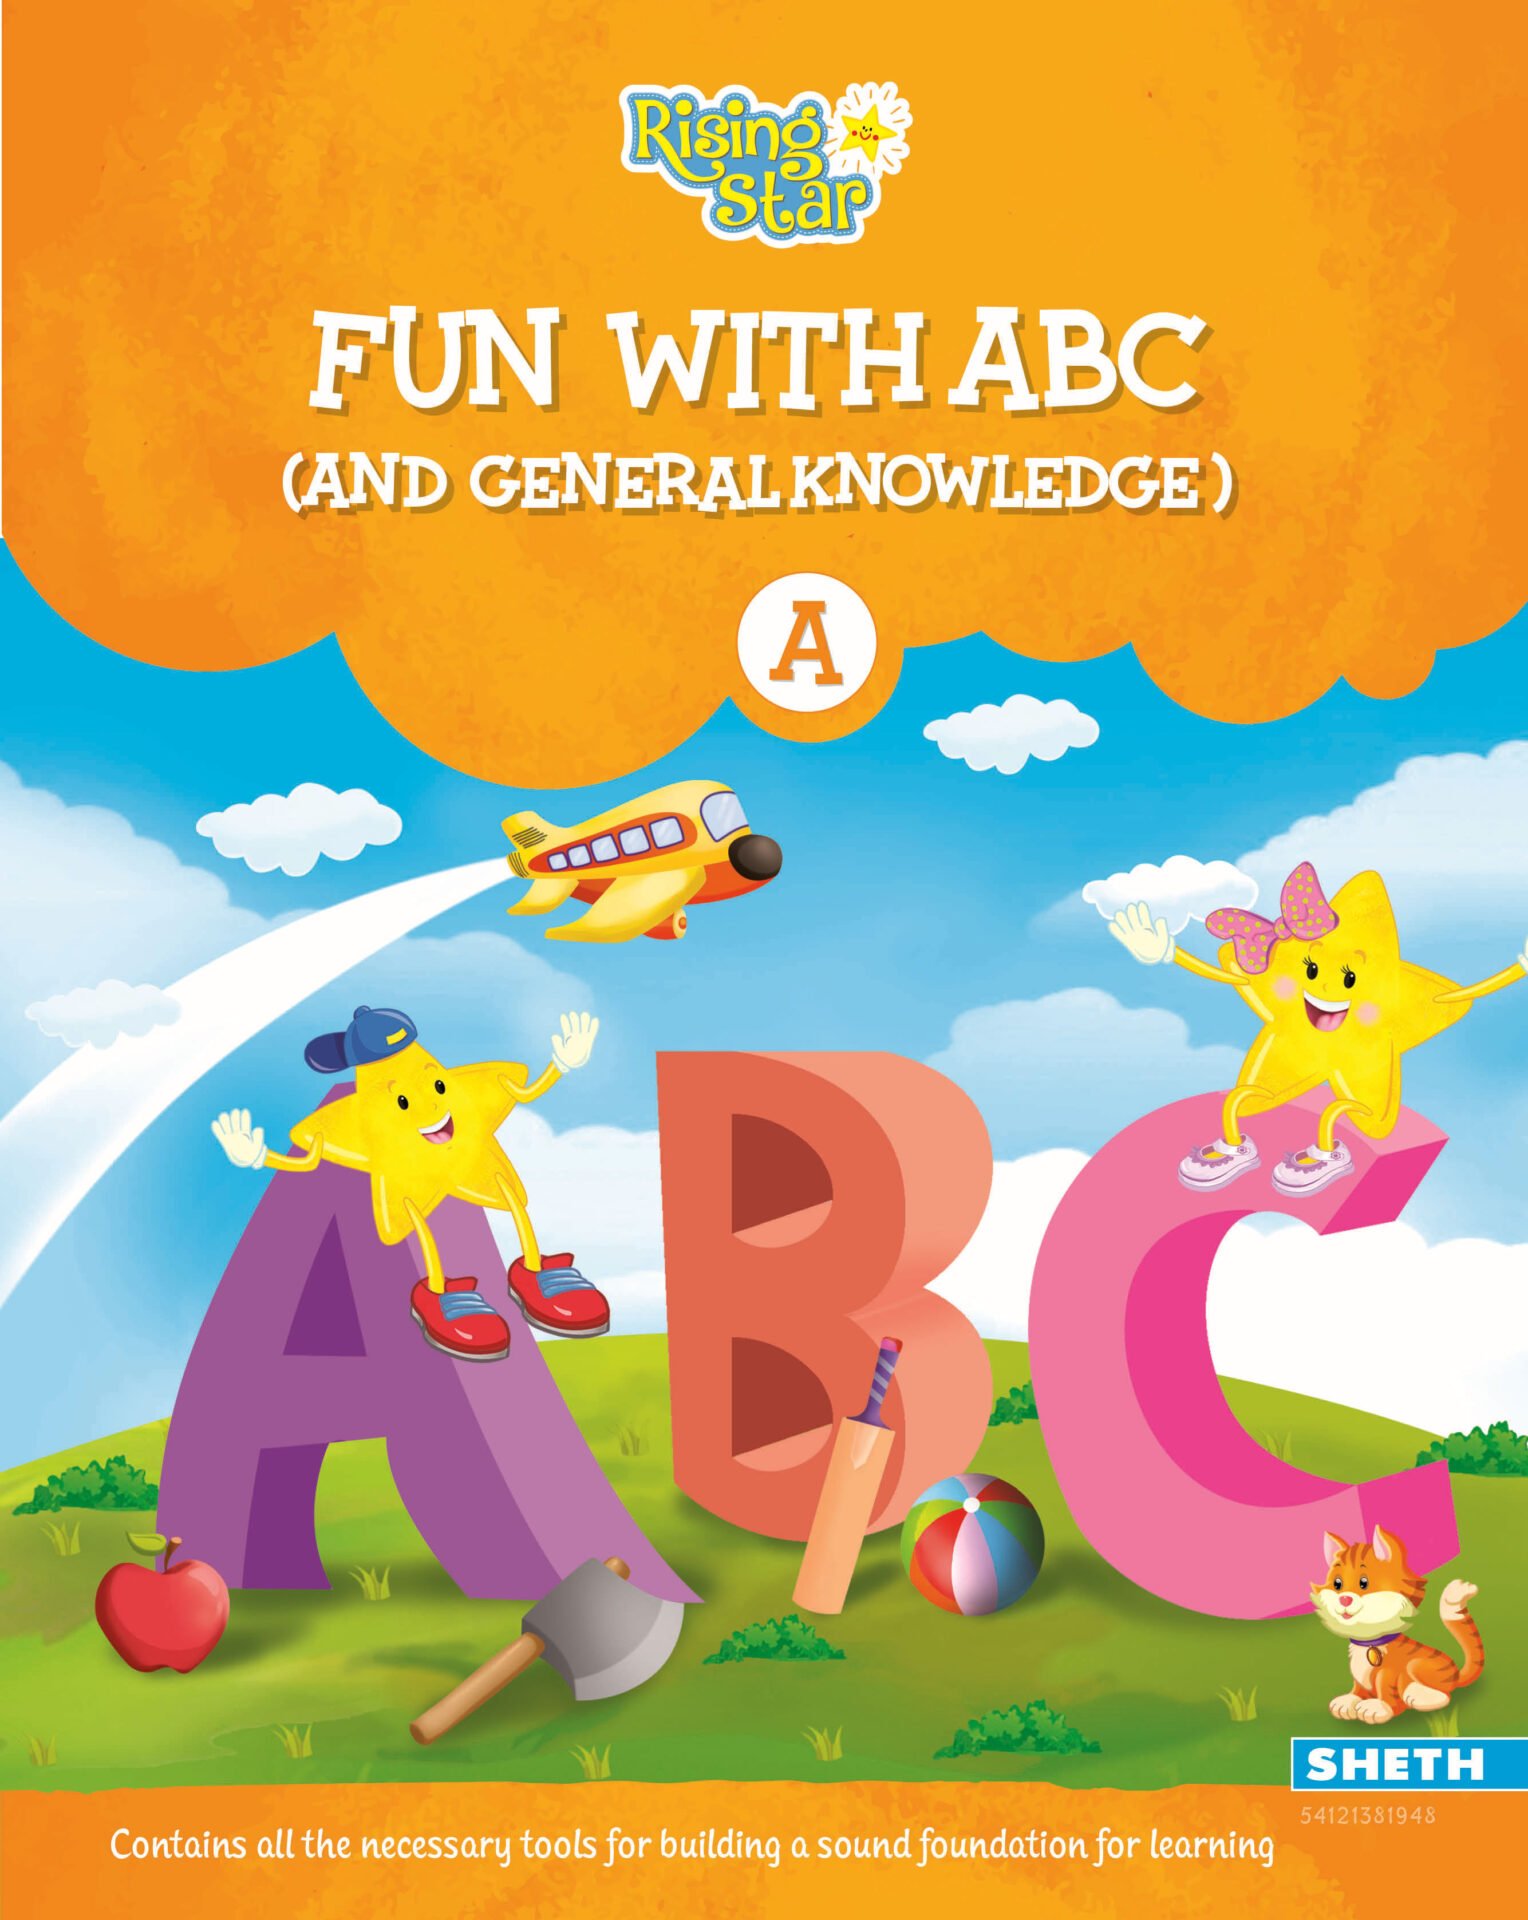 Rising Star Fun with ABC and General Knowledge A 1